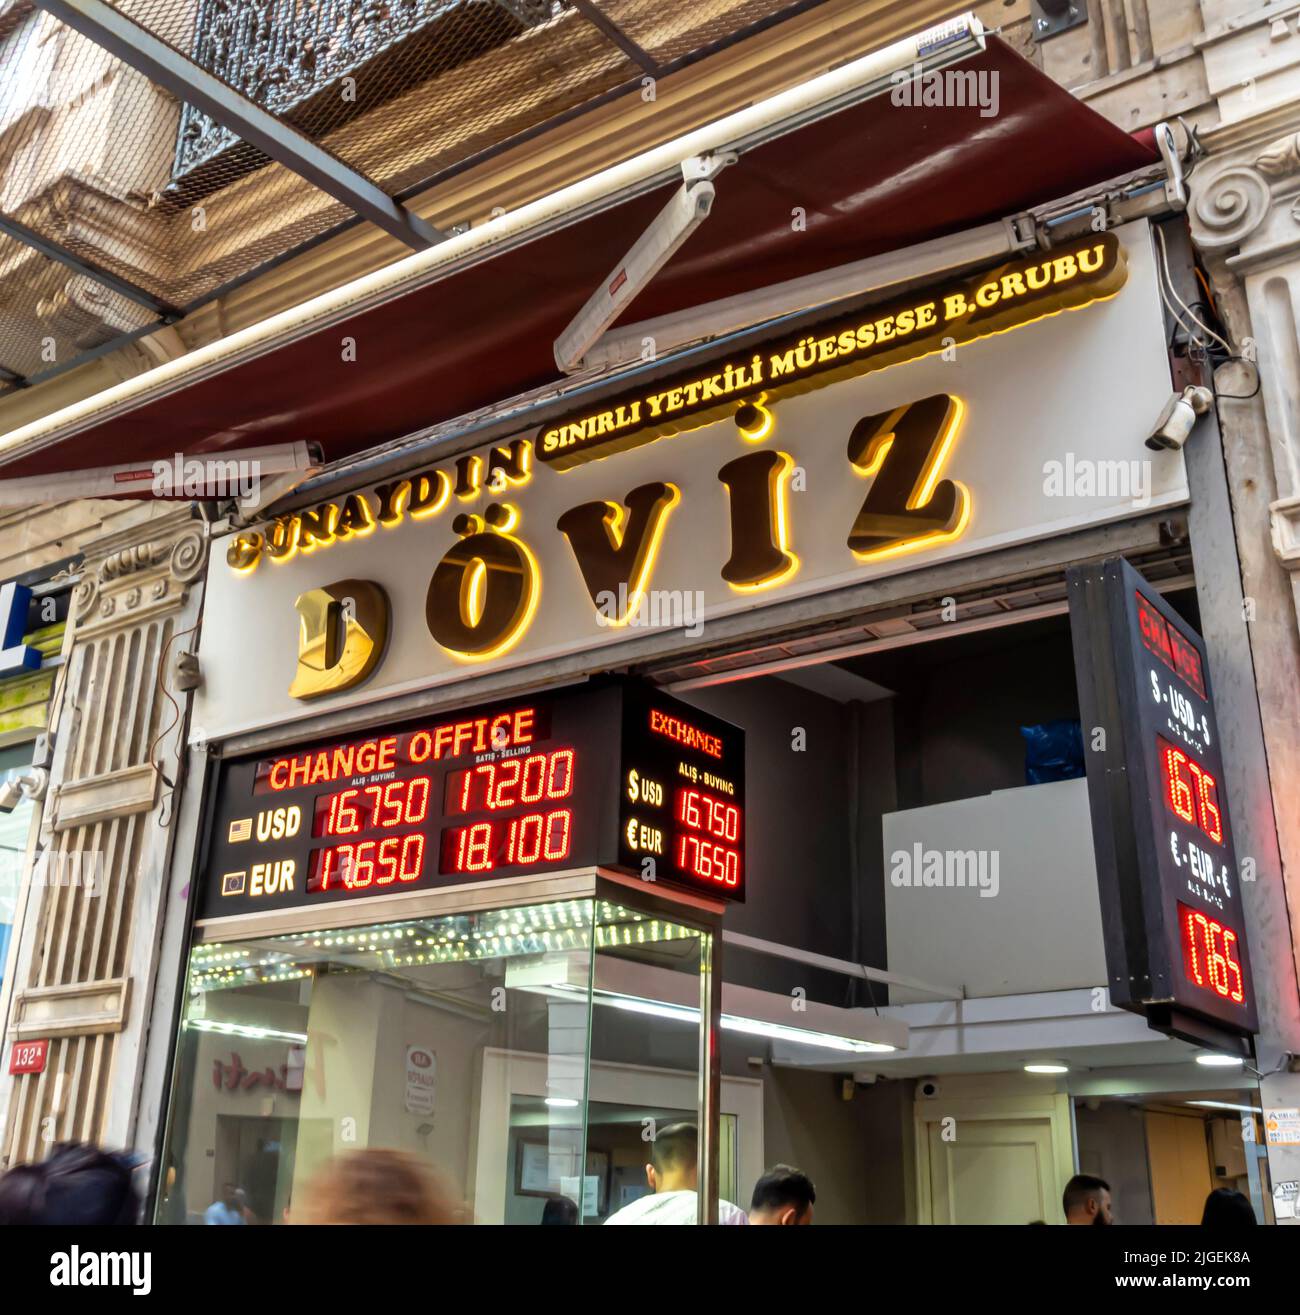 Doviz currency exchange stand with currency rates display in Beyouglu, Istanbul, Turkey Stock Photo